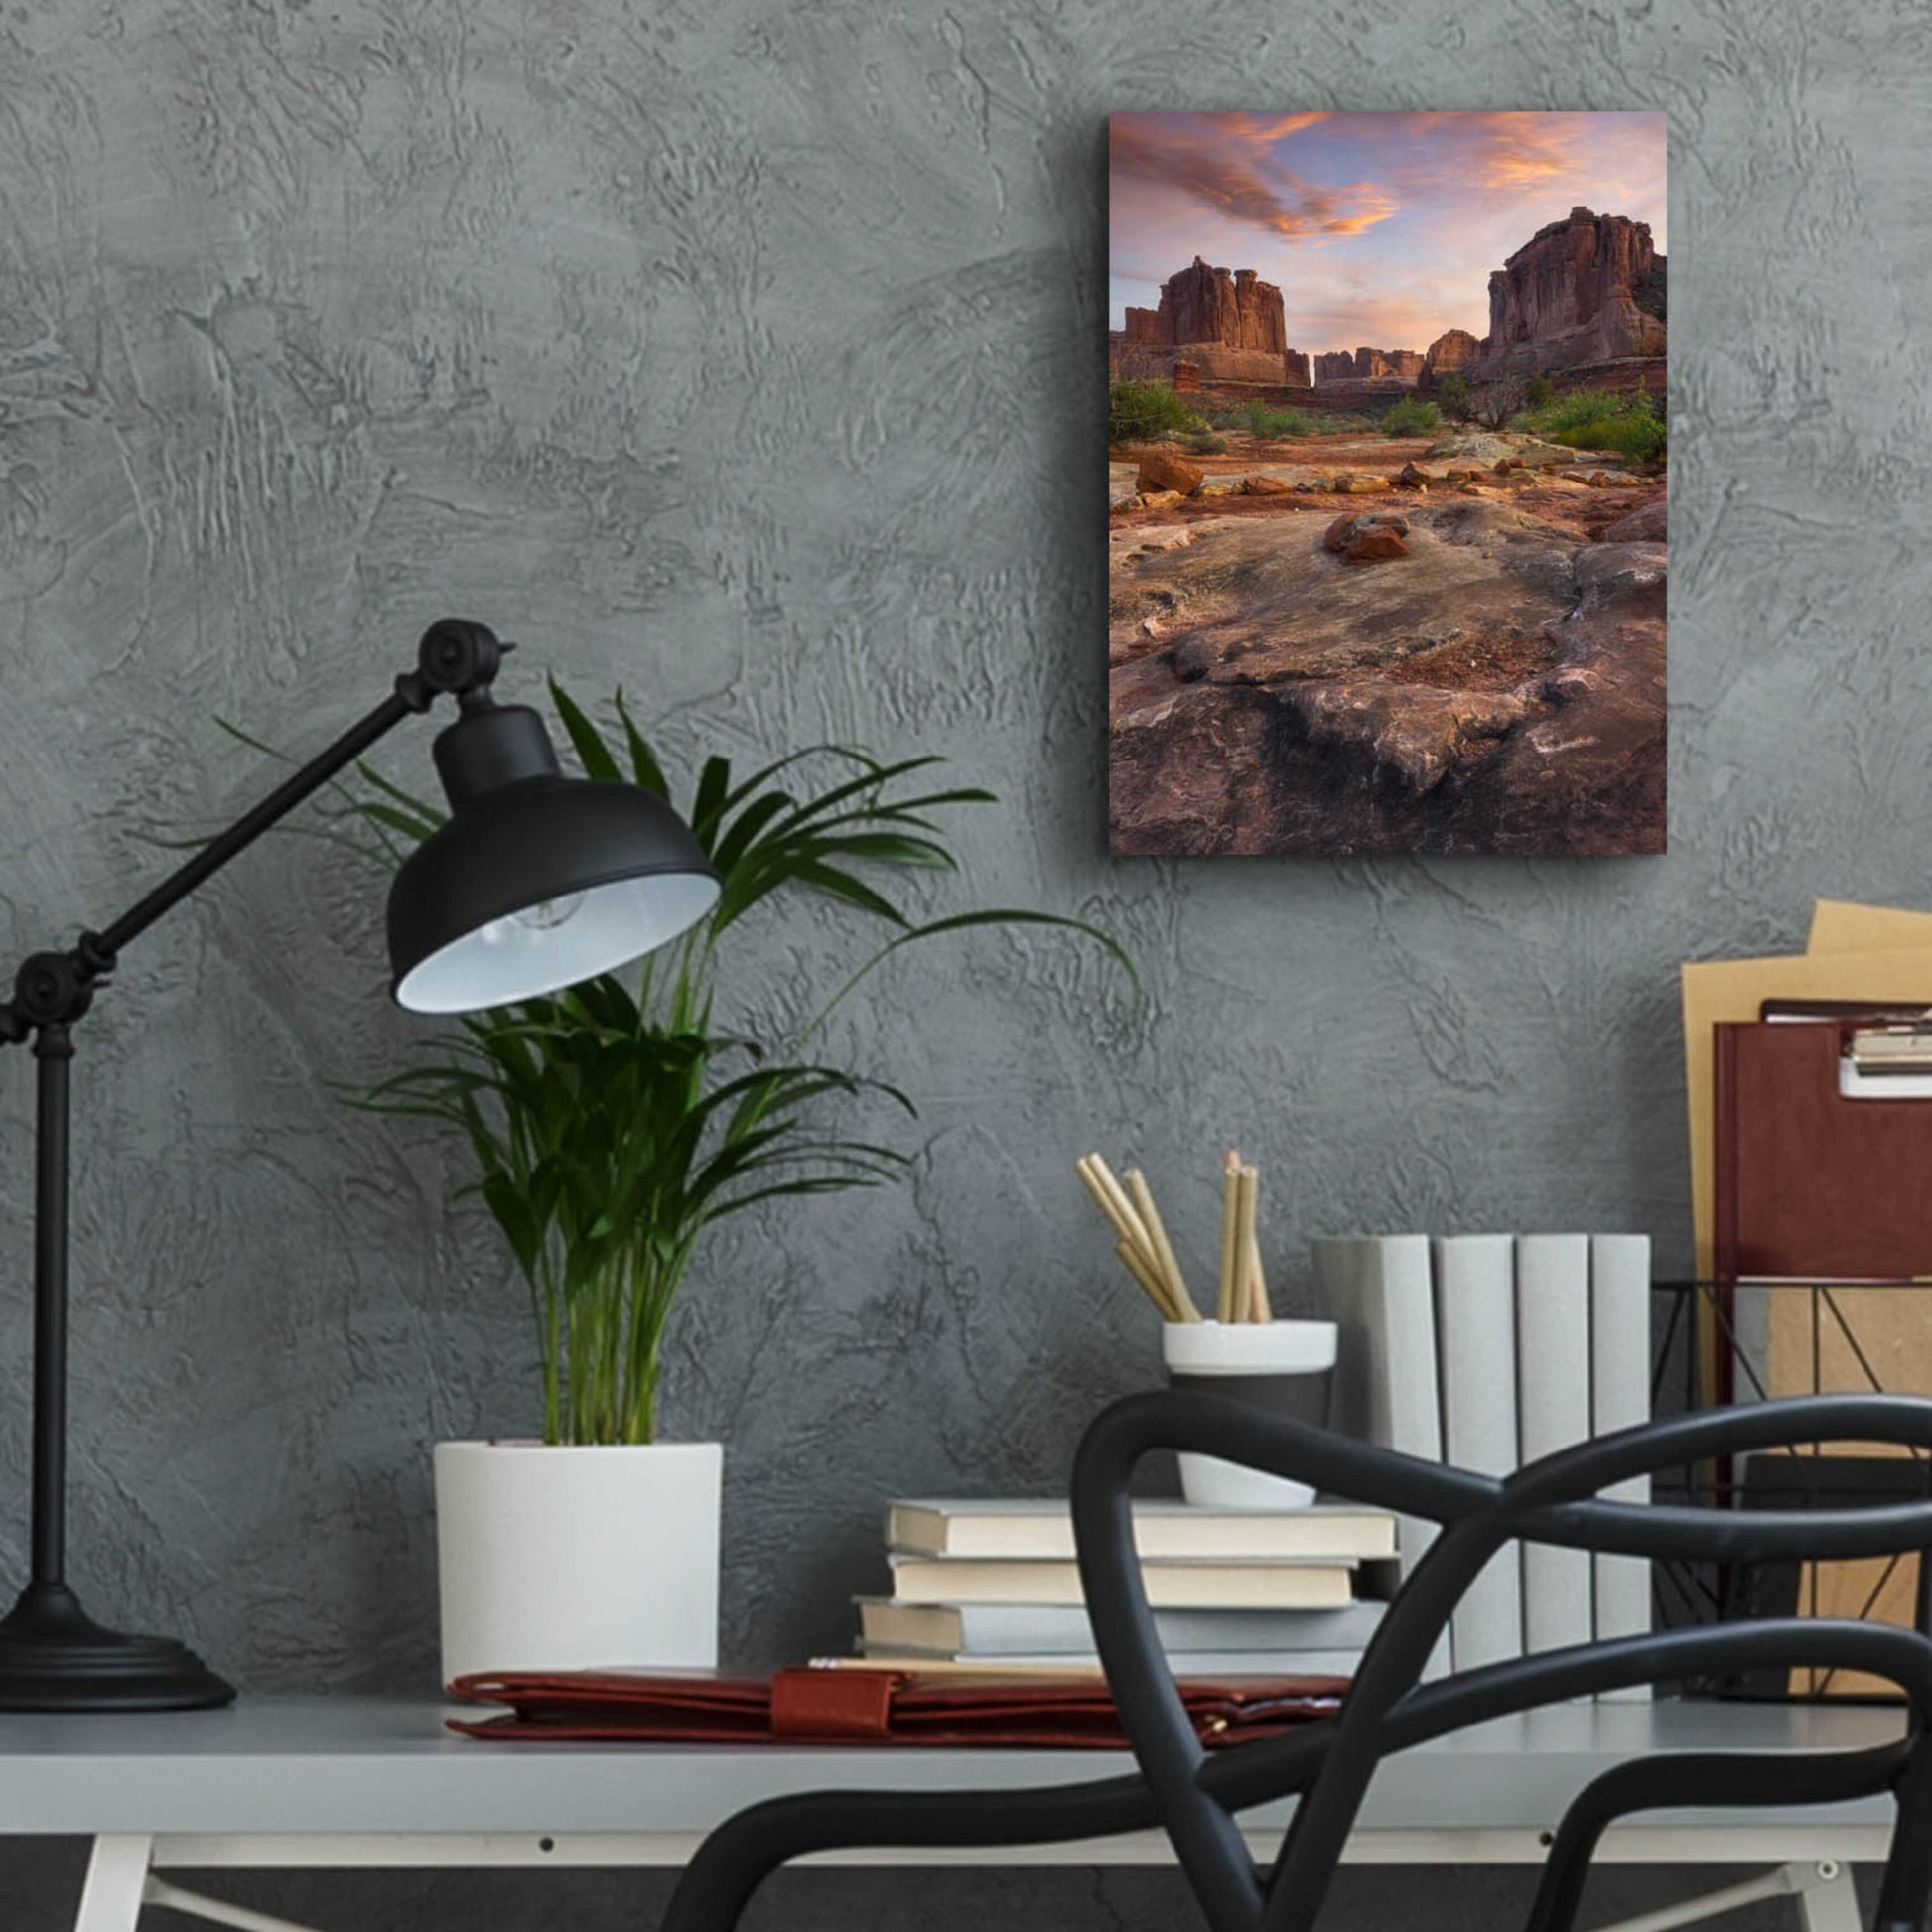 Epic Art 'Park Avenue Sunset - Arches National Park' by Darren White, Acrylic Glass Wall Art,12x16